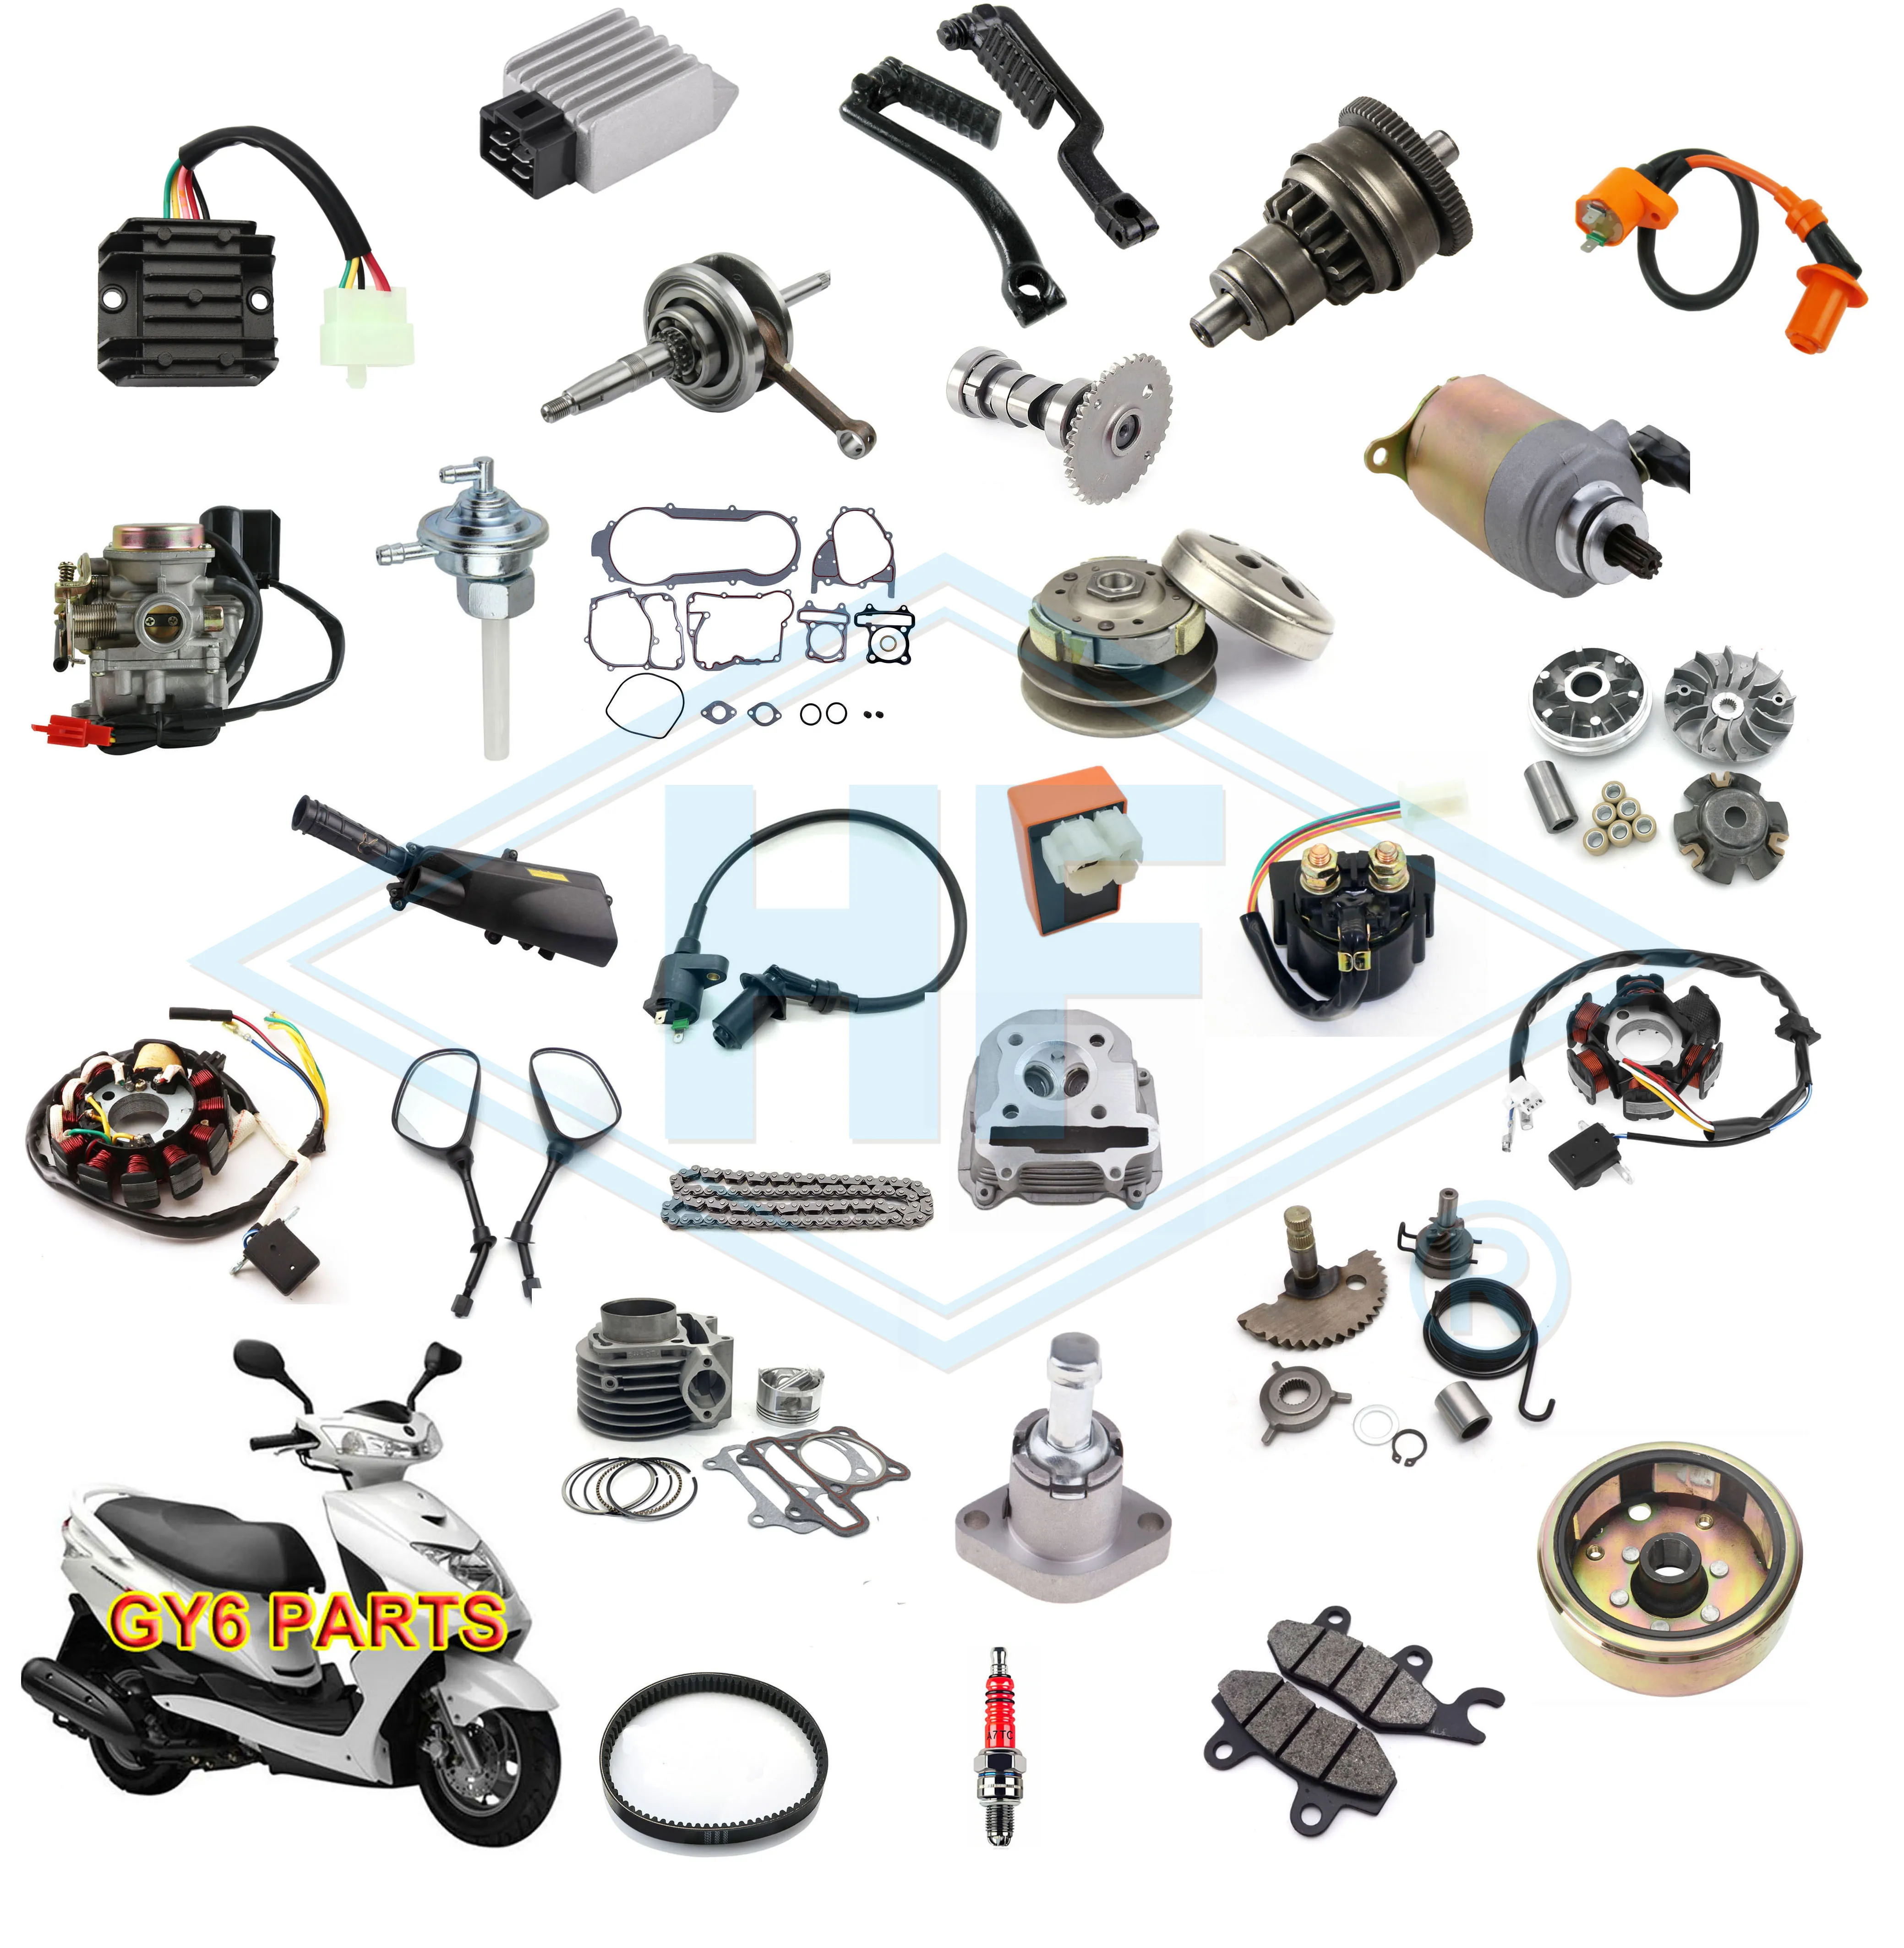 Manufacturer of parts for scooters, mécaboites